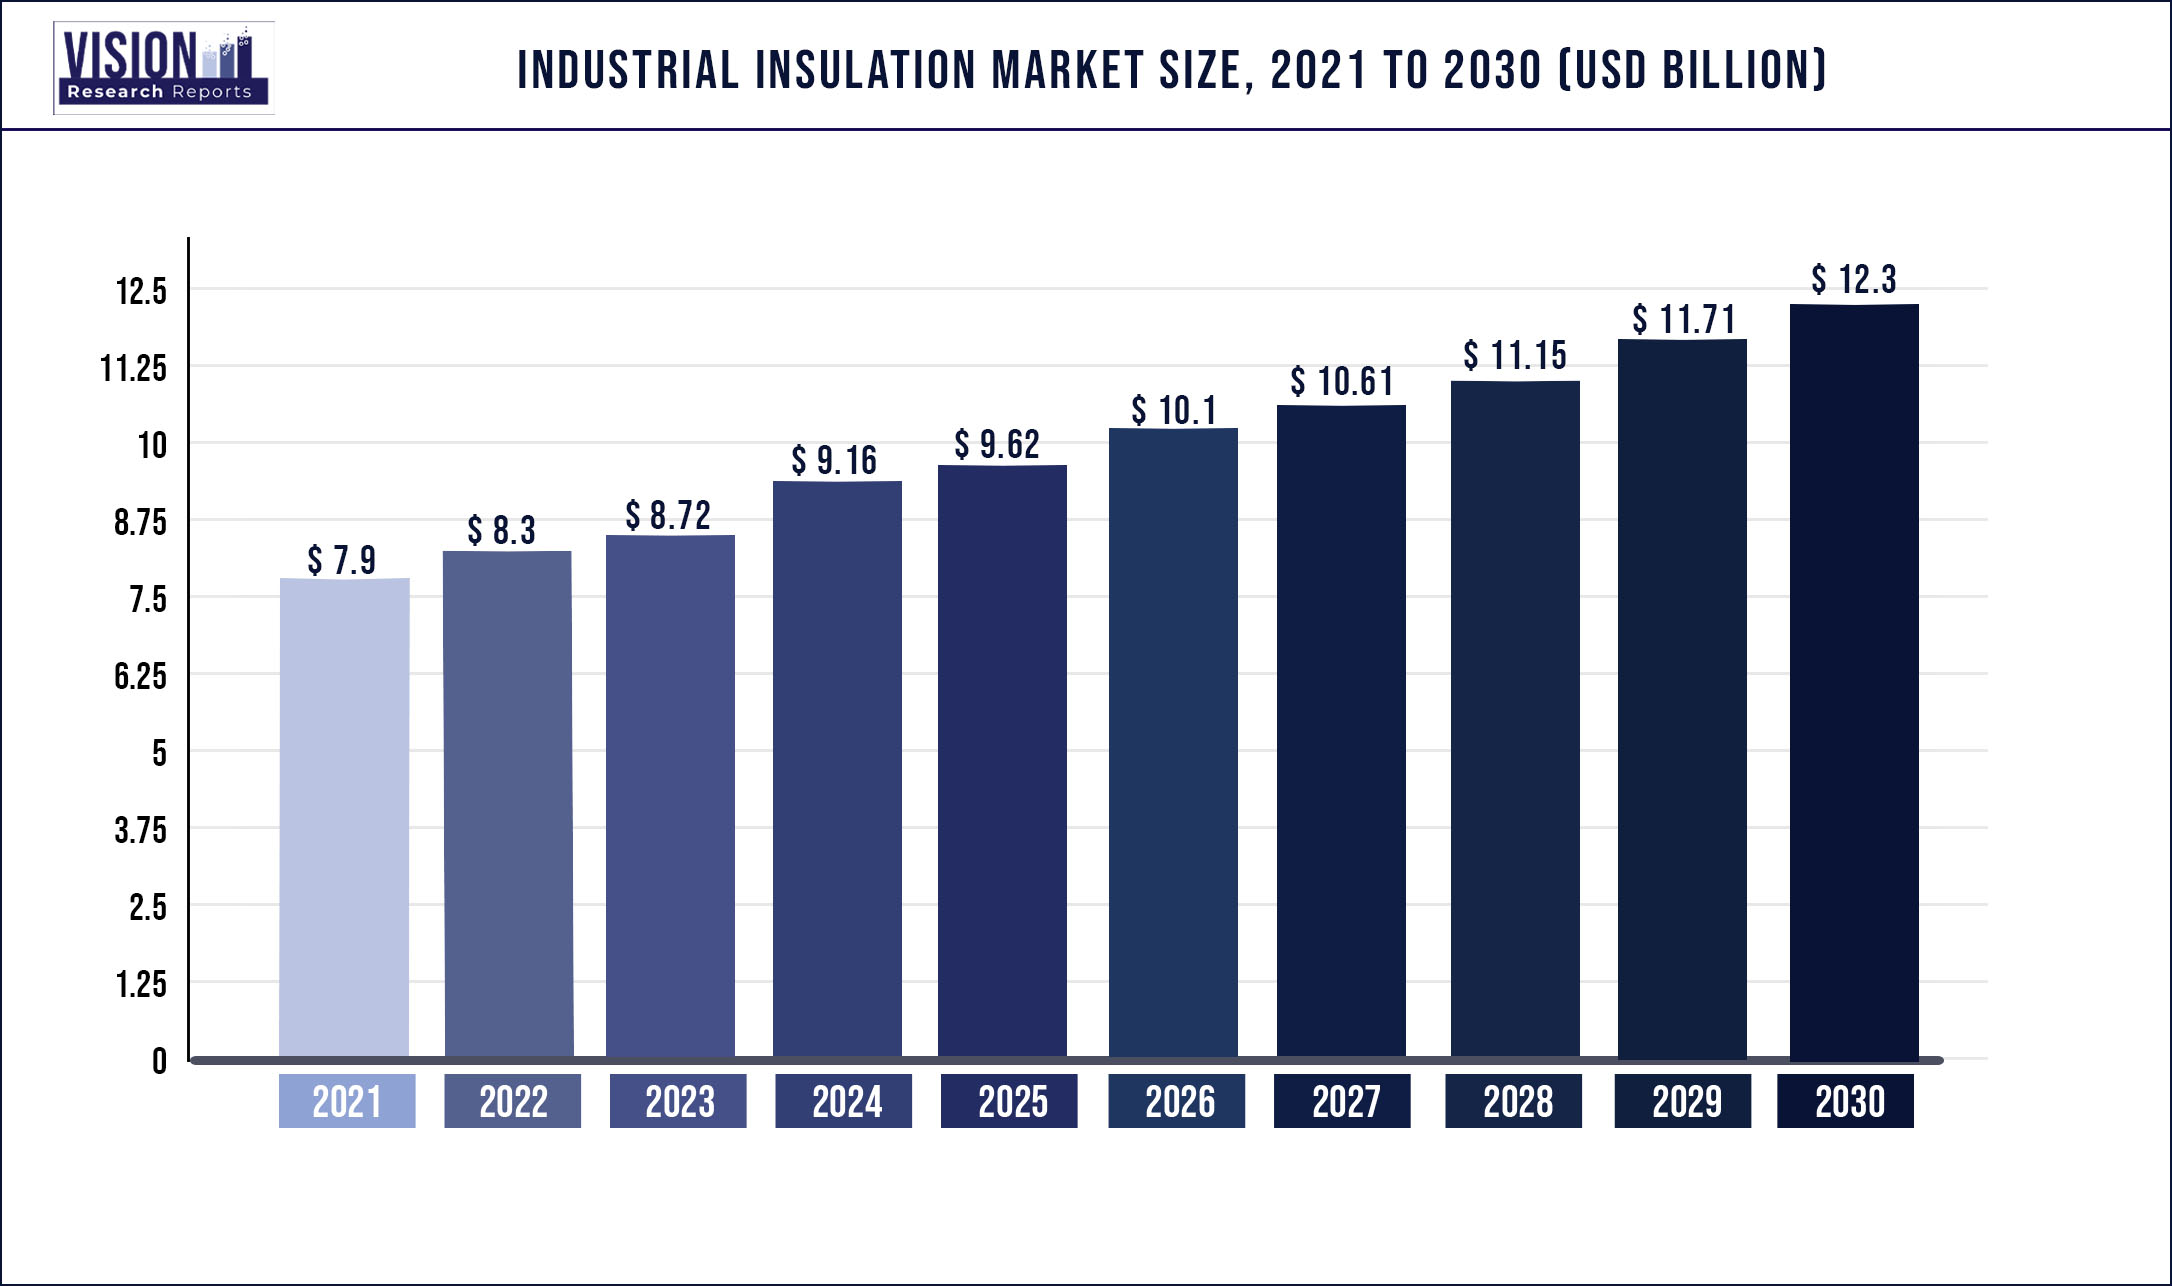 Industrial Insulation Market Size 2021 to 2030